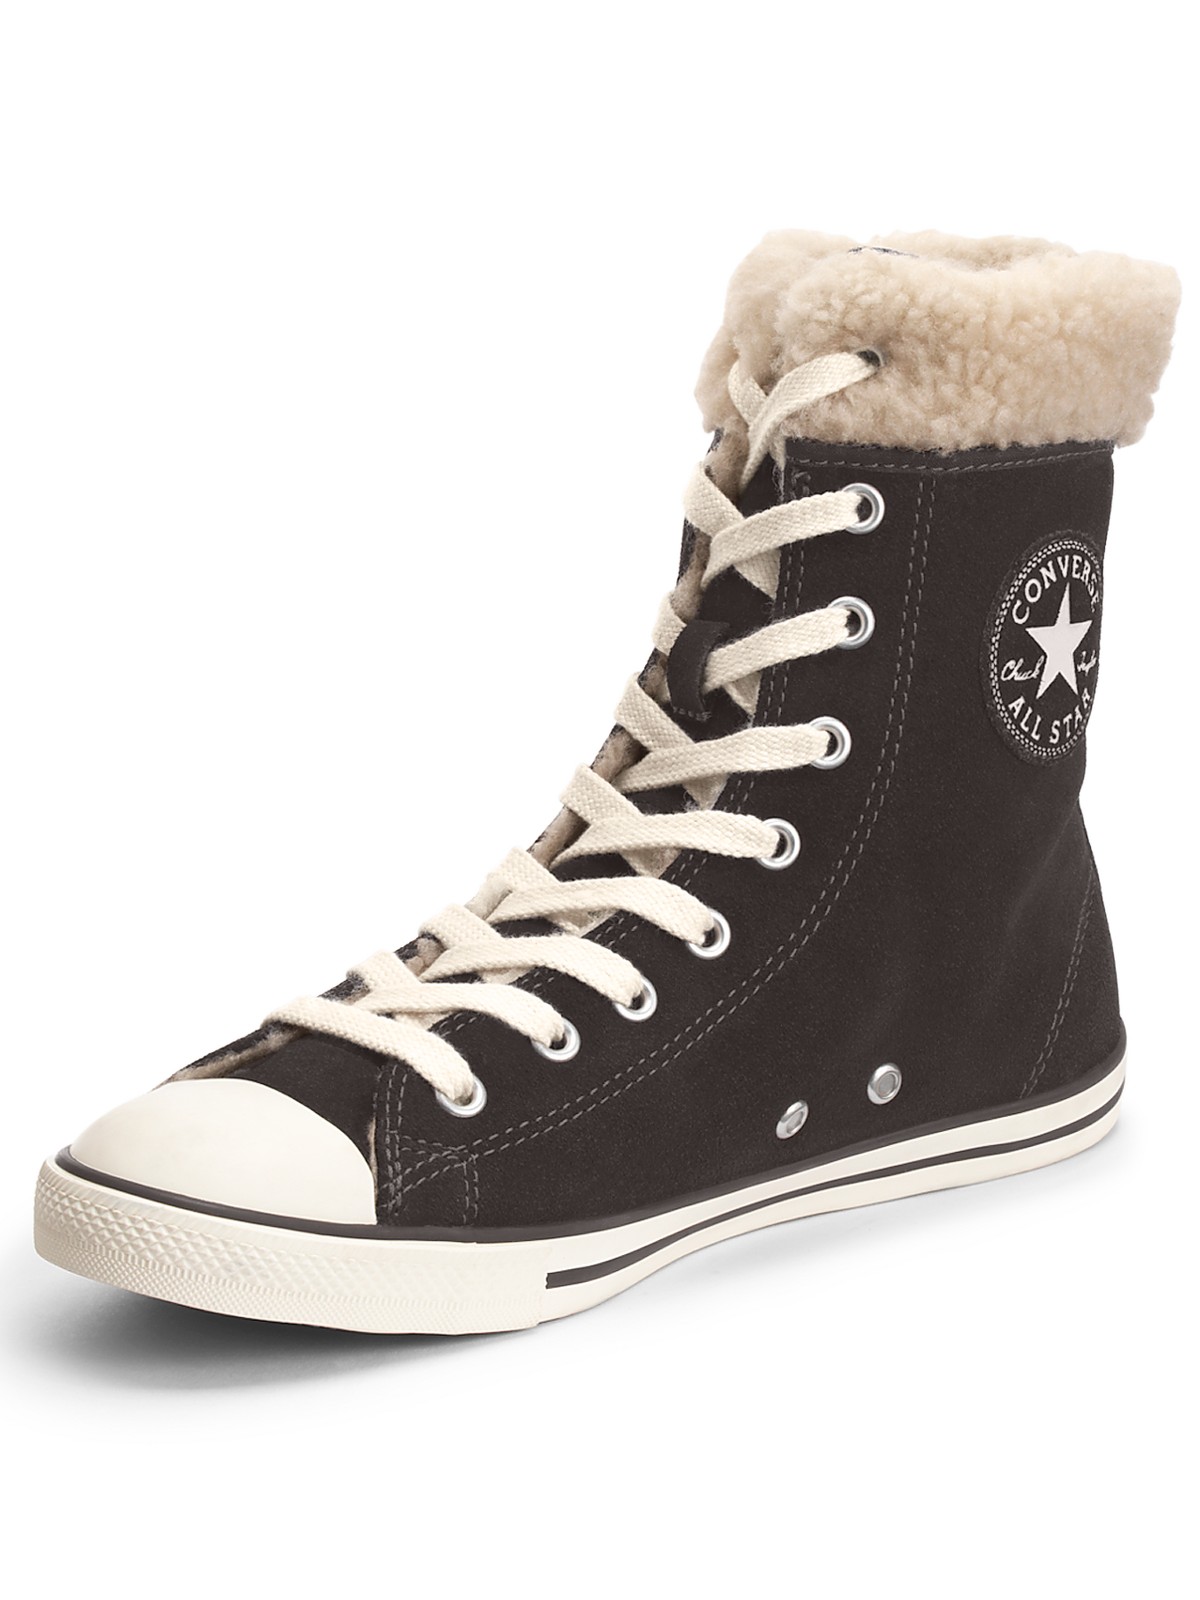 39  Converse all star shoes brown for Trend in 2022